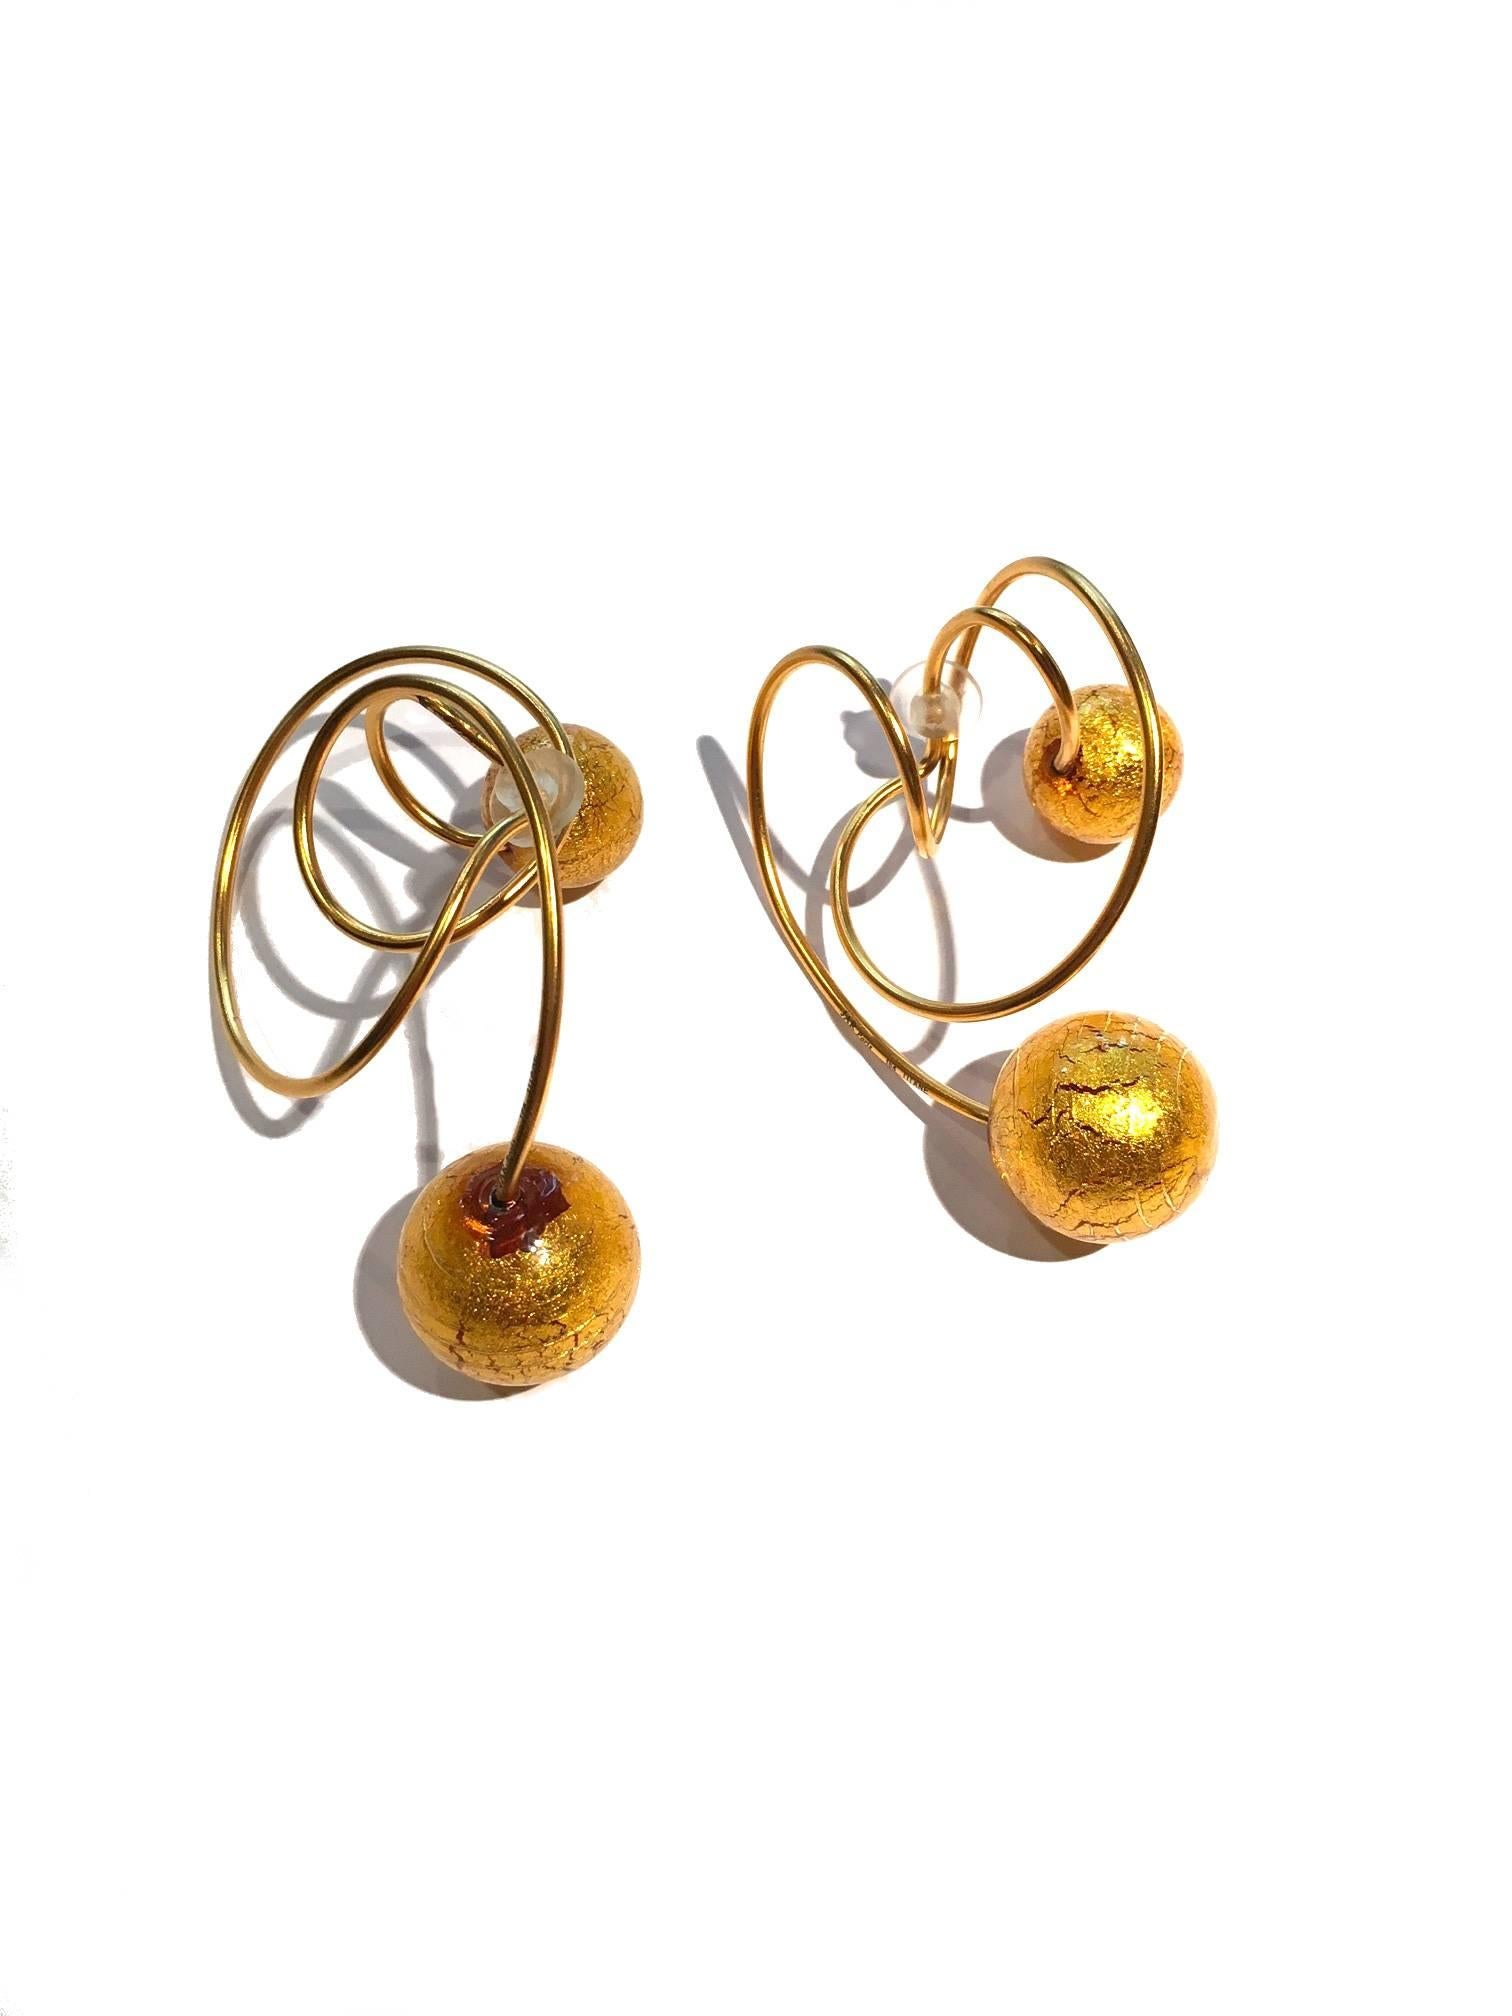 JAR Earrings "Carnaval à Venise" in titanium, spiral pattern and an embedded ball gold leaf on each end. 
Comes with JAR pouch. 